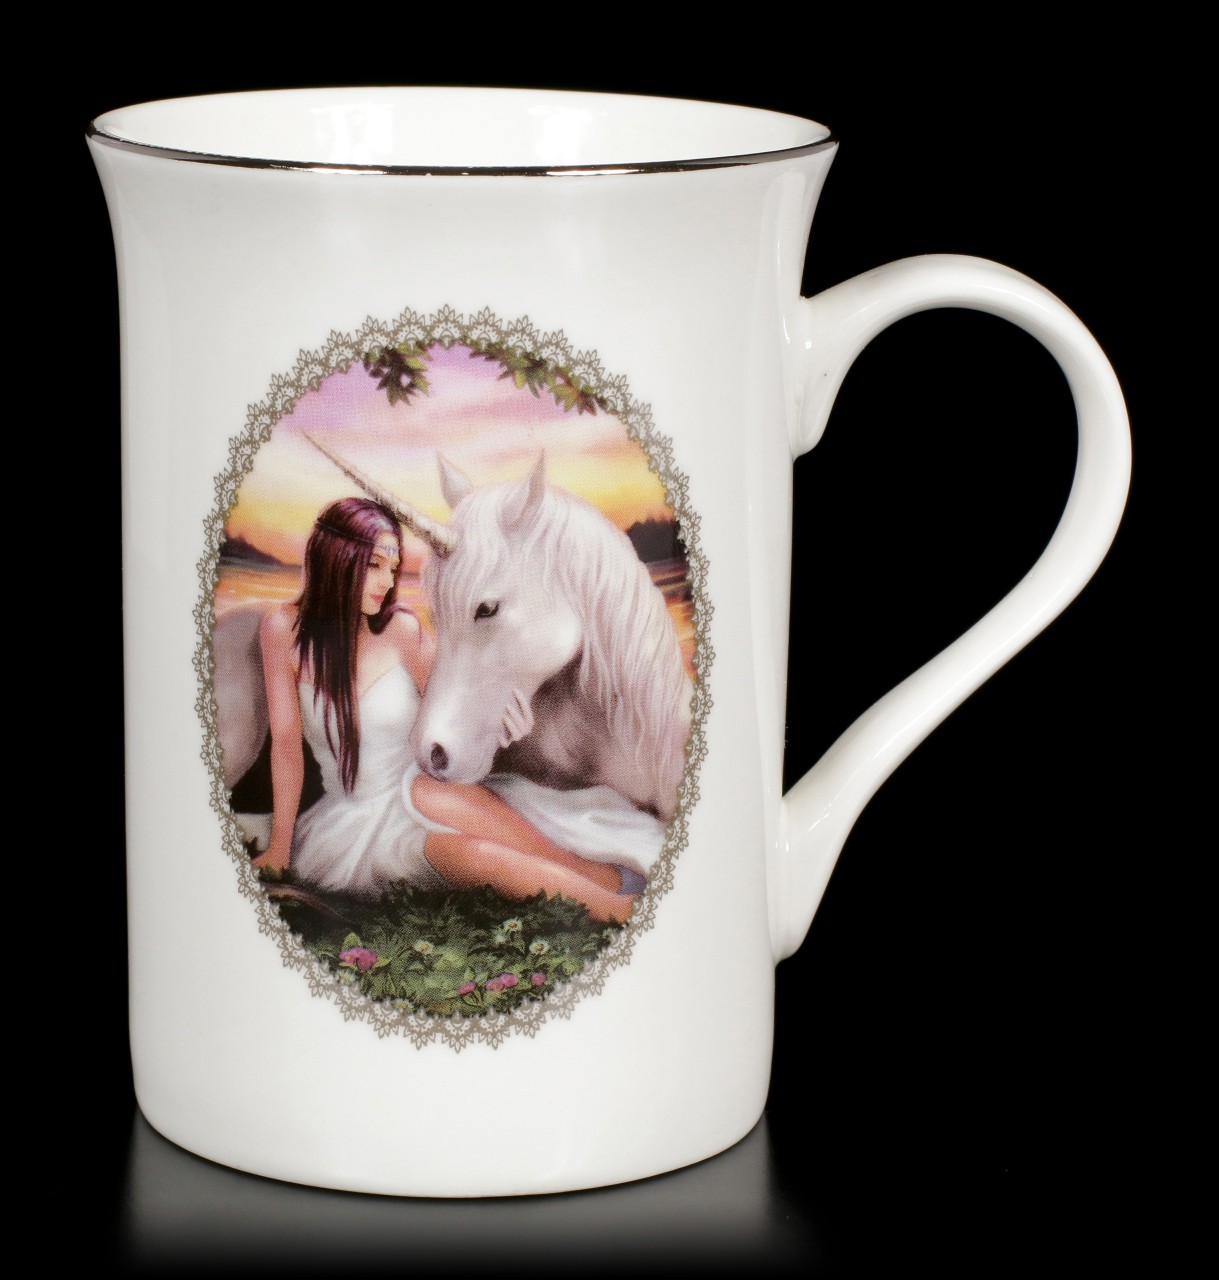 Mug with Unicorn - Pure Heart by Anne Stokes